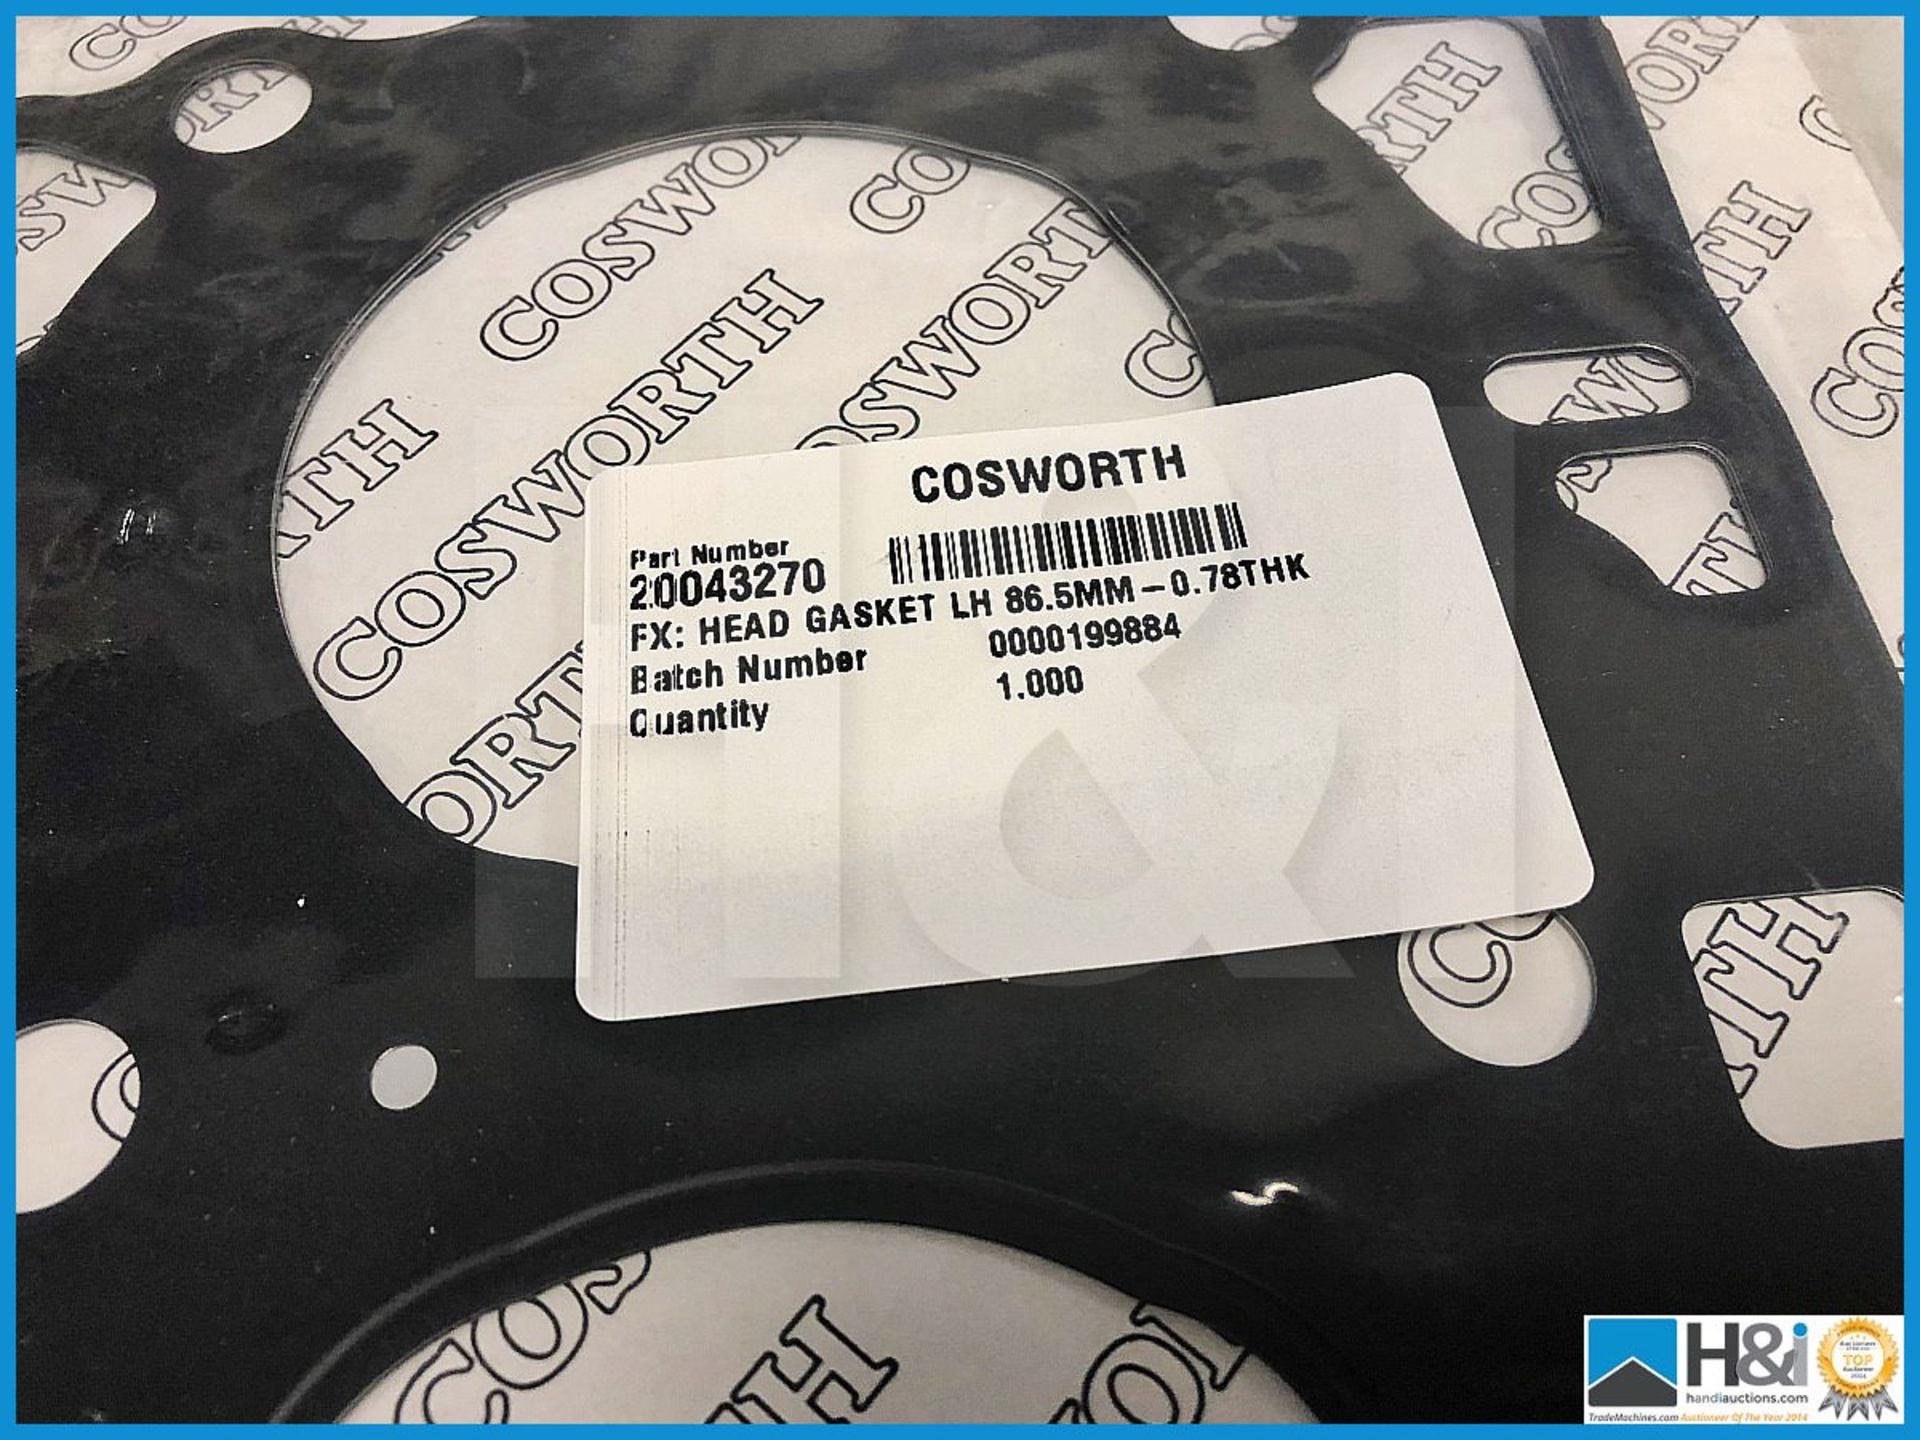 6 x Cosworth Toyota GT86 FX gasket LH 86.5mm - 0.78 thk. Code: 20043270 - Image 2 of 2